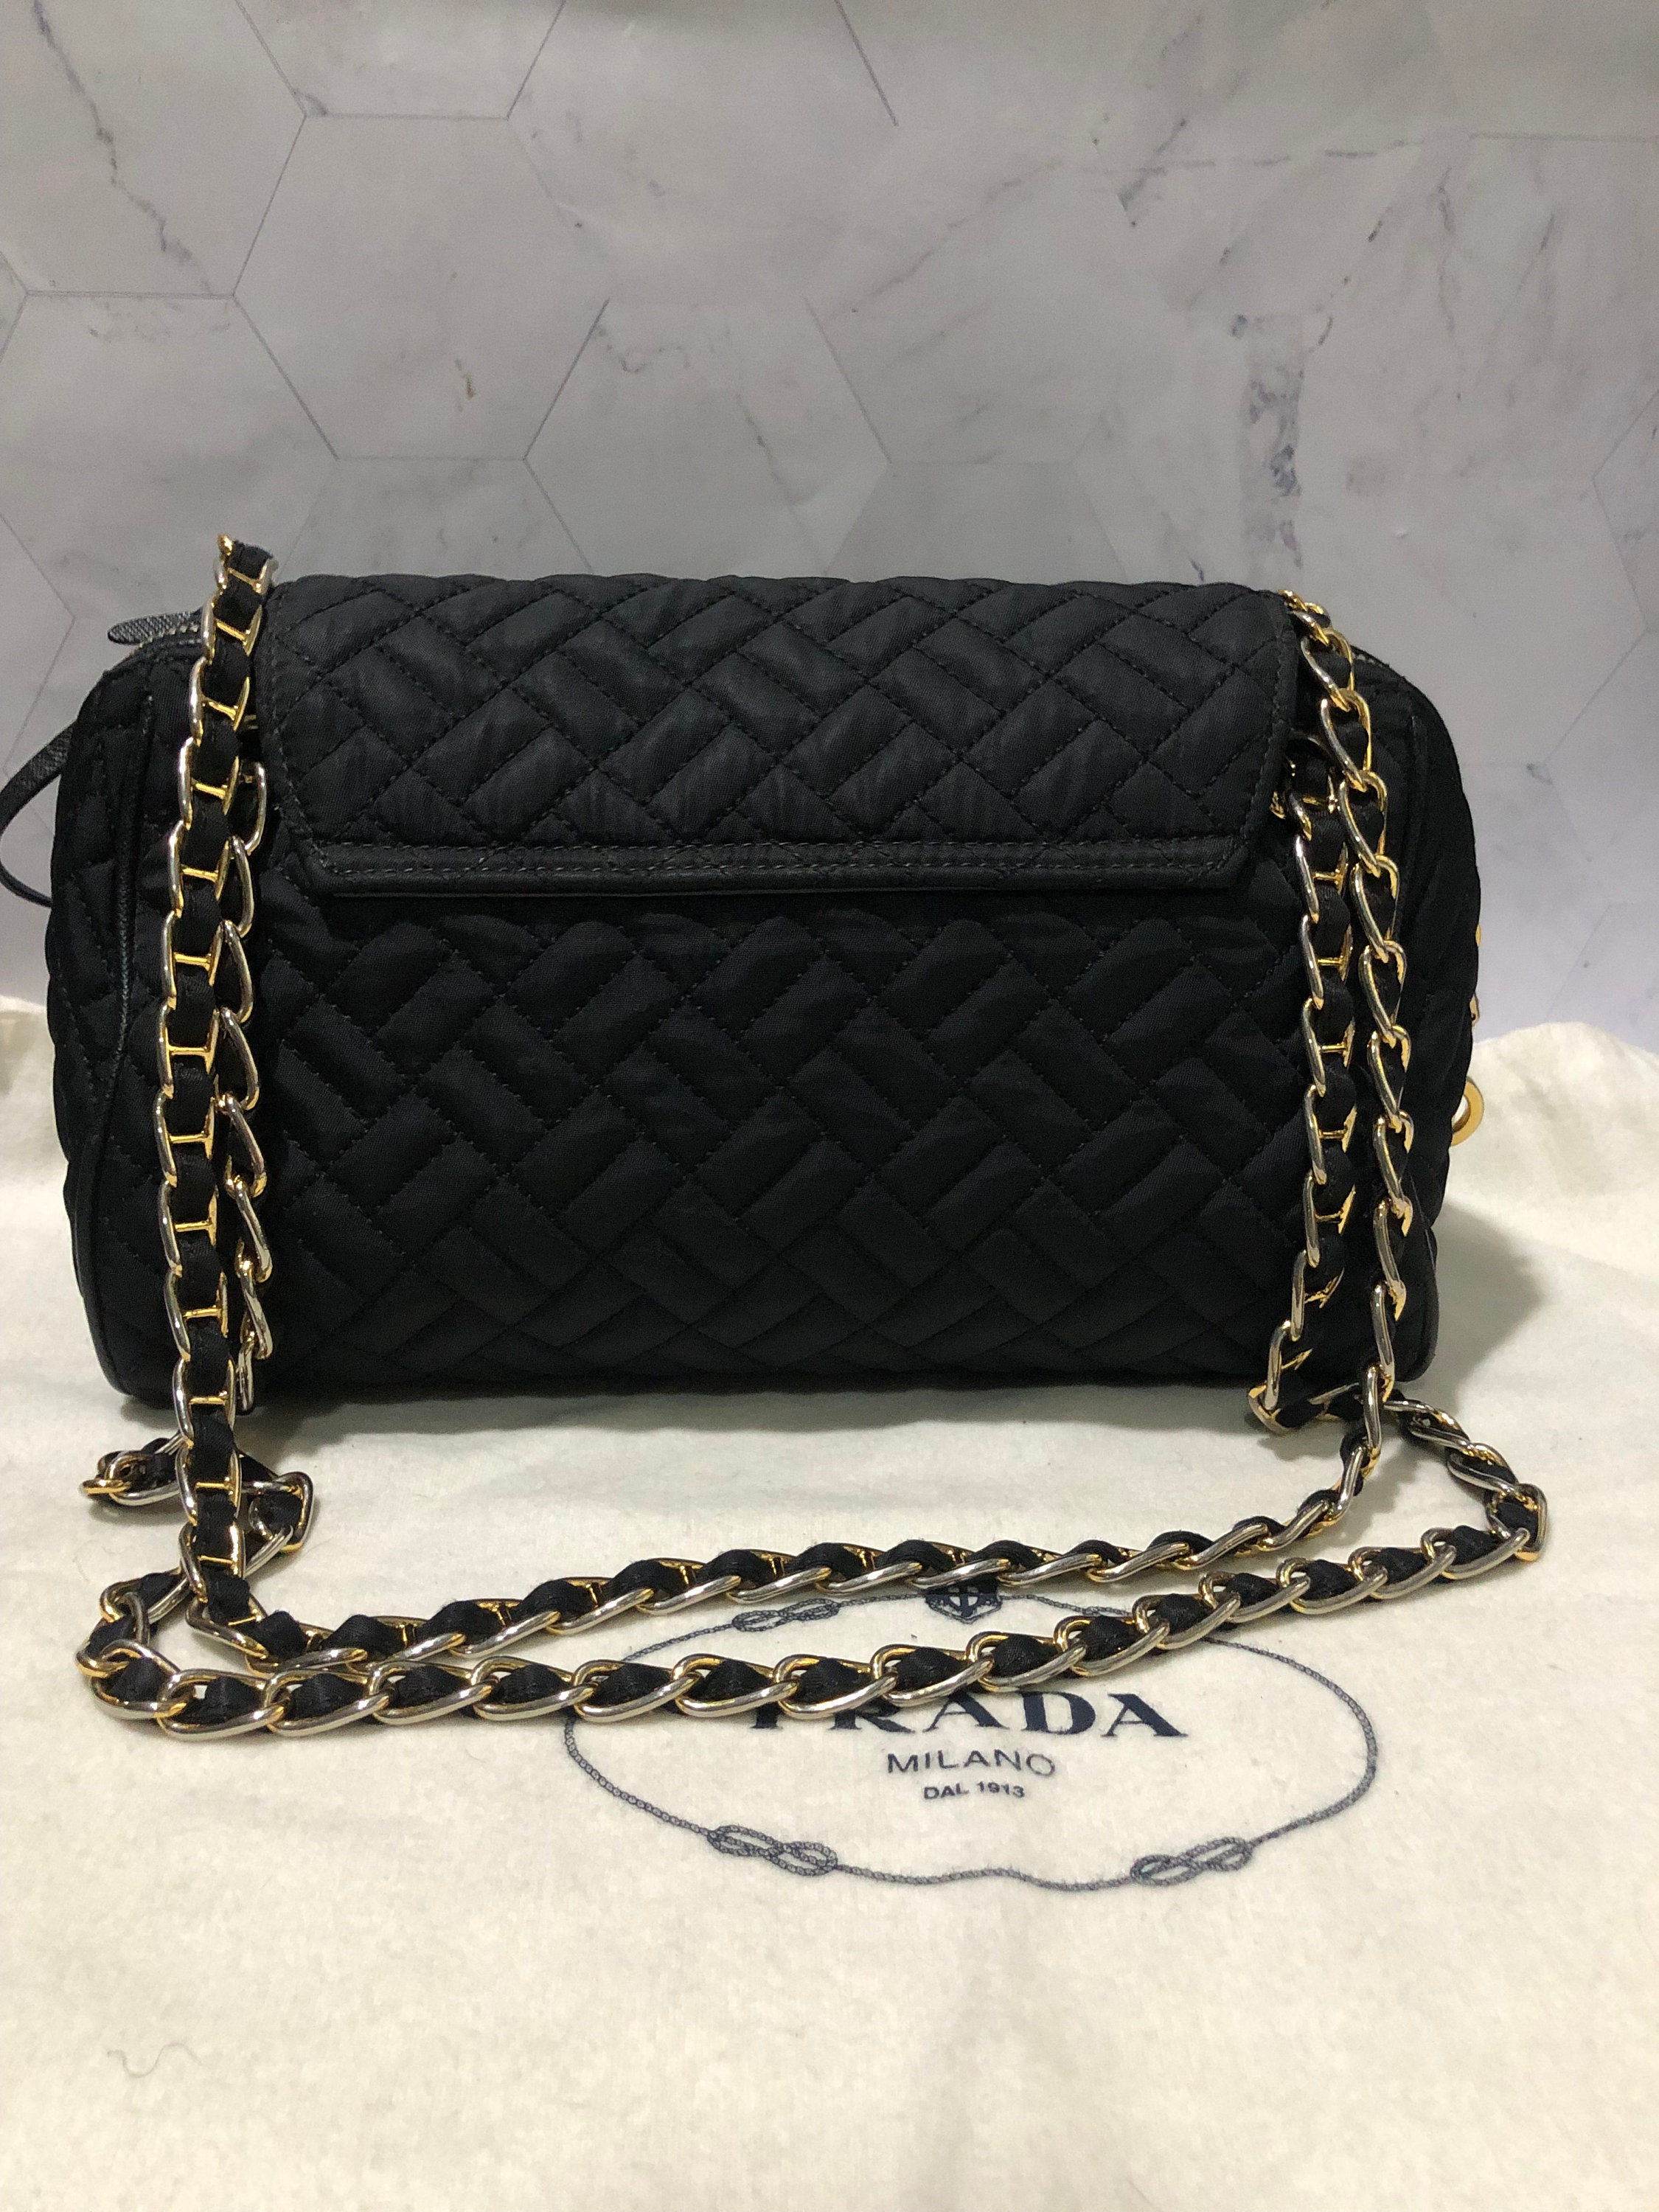 Chanel Limited Edition Bag - 175 For Sale on 1stDibs  chanel classic flap  bag limited edition, chanel boy bag limited edition, chanel limited edition  bags 2015